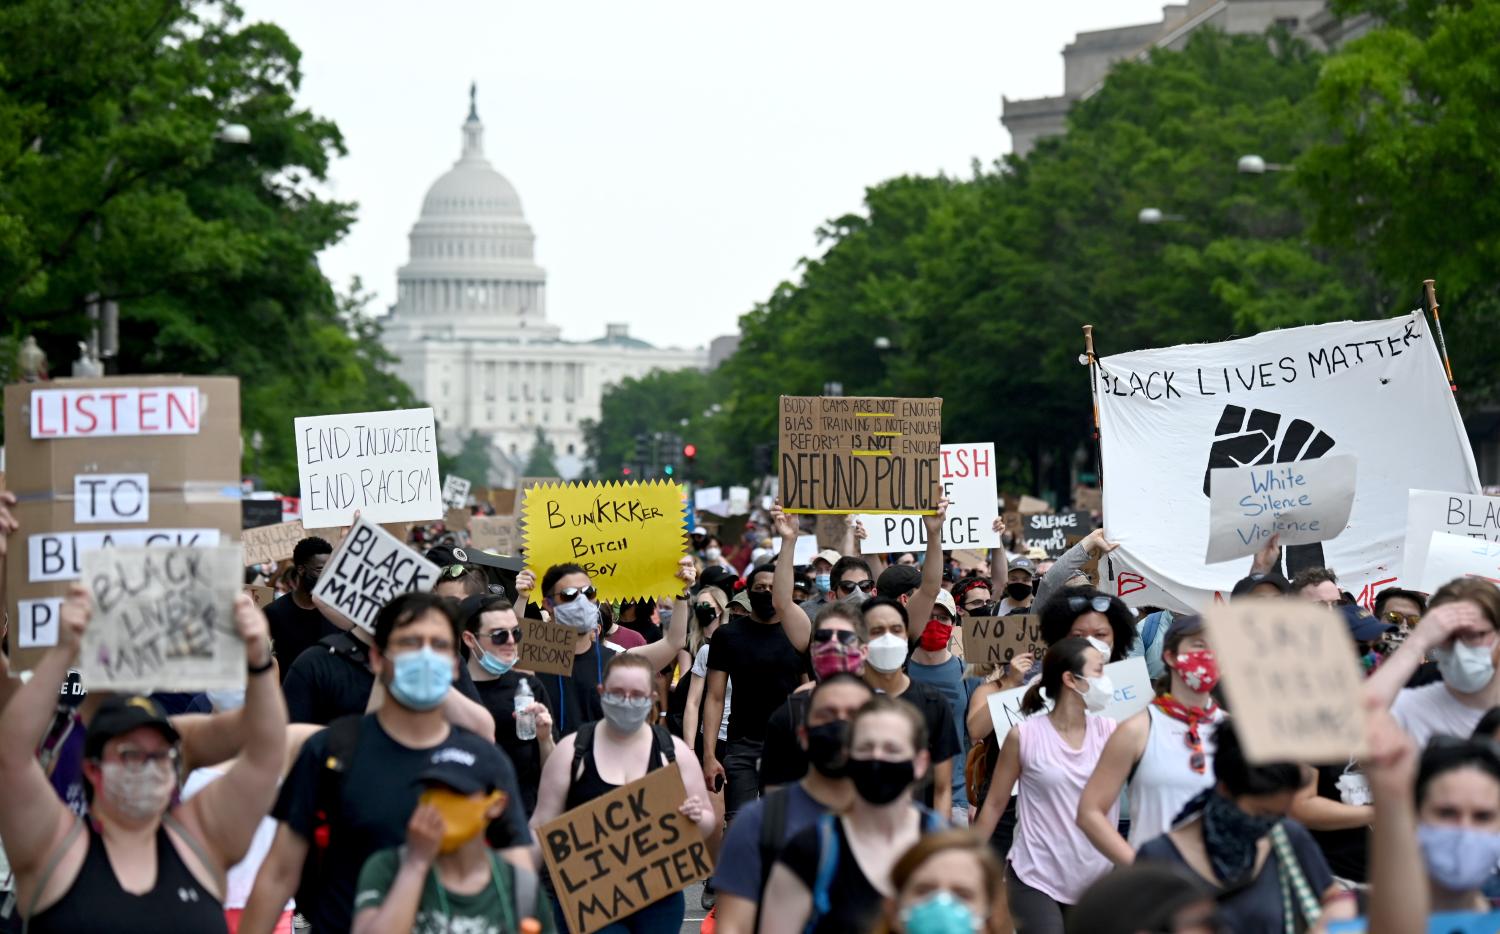 FILE PHOTO: Demonstrators march from the U.S. Capitol Building during a protest against racial inequality in the aftermath of the death in Minneapolis police custody of George Floyd, in Washington, U.S., June 6, 2020. REUTERS/Erin Scott/File Photo